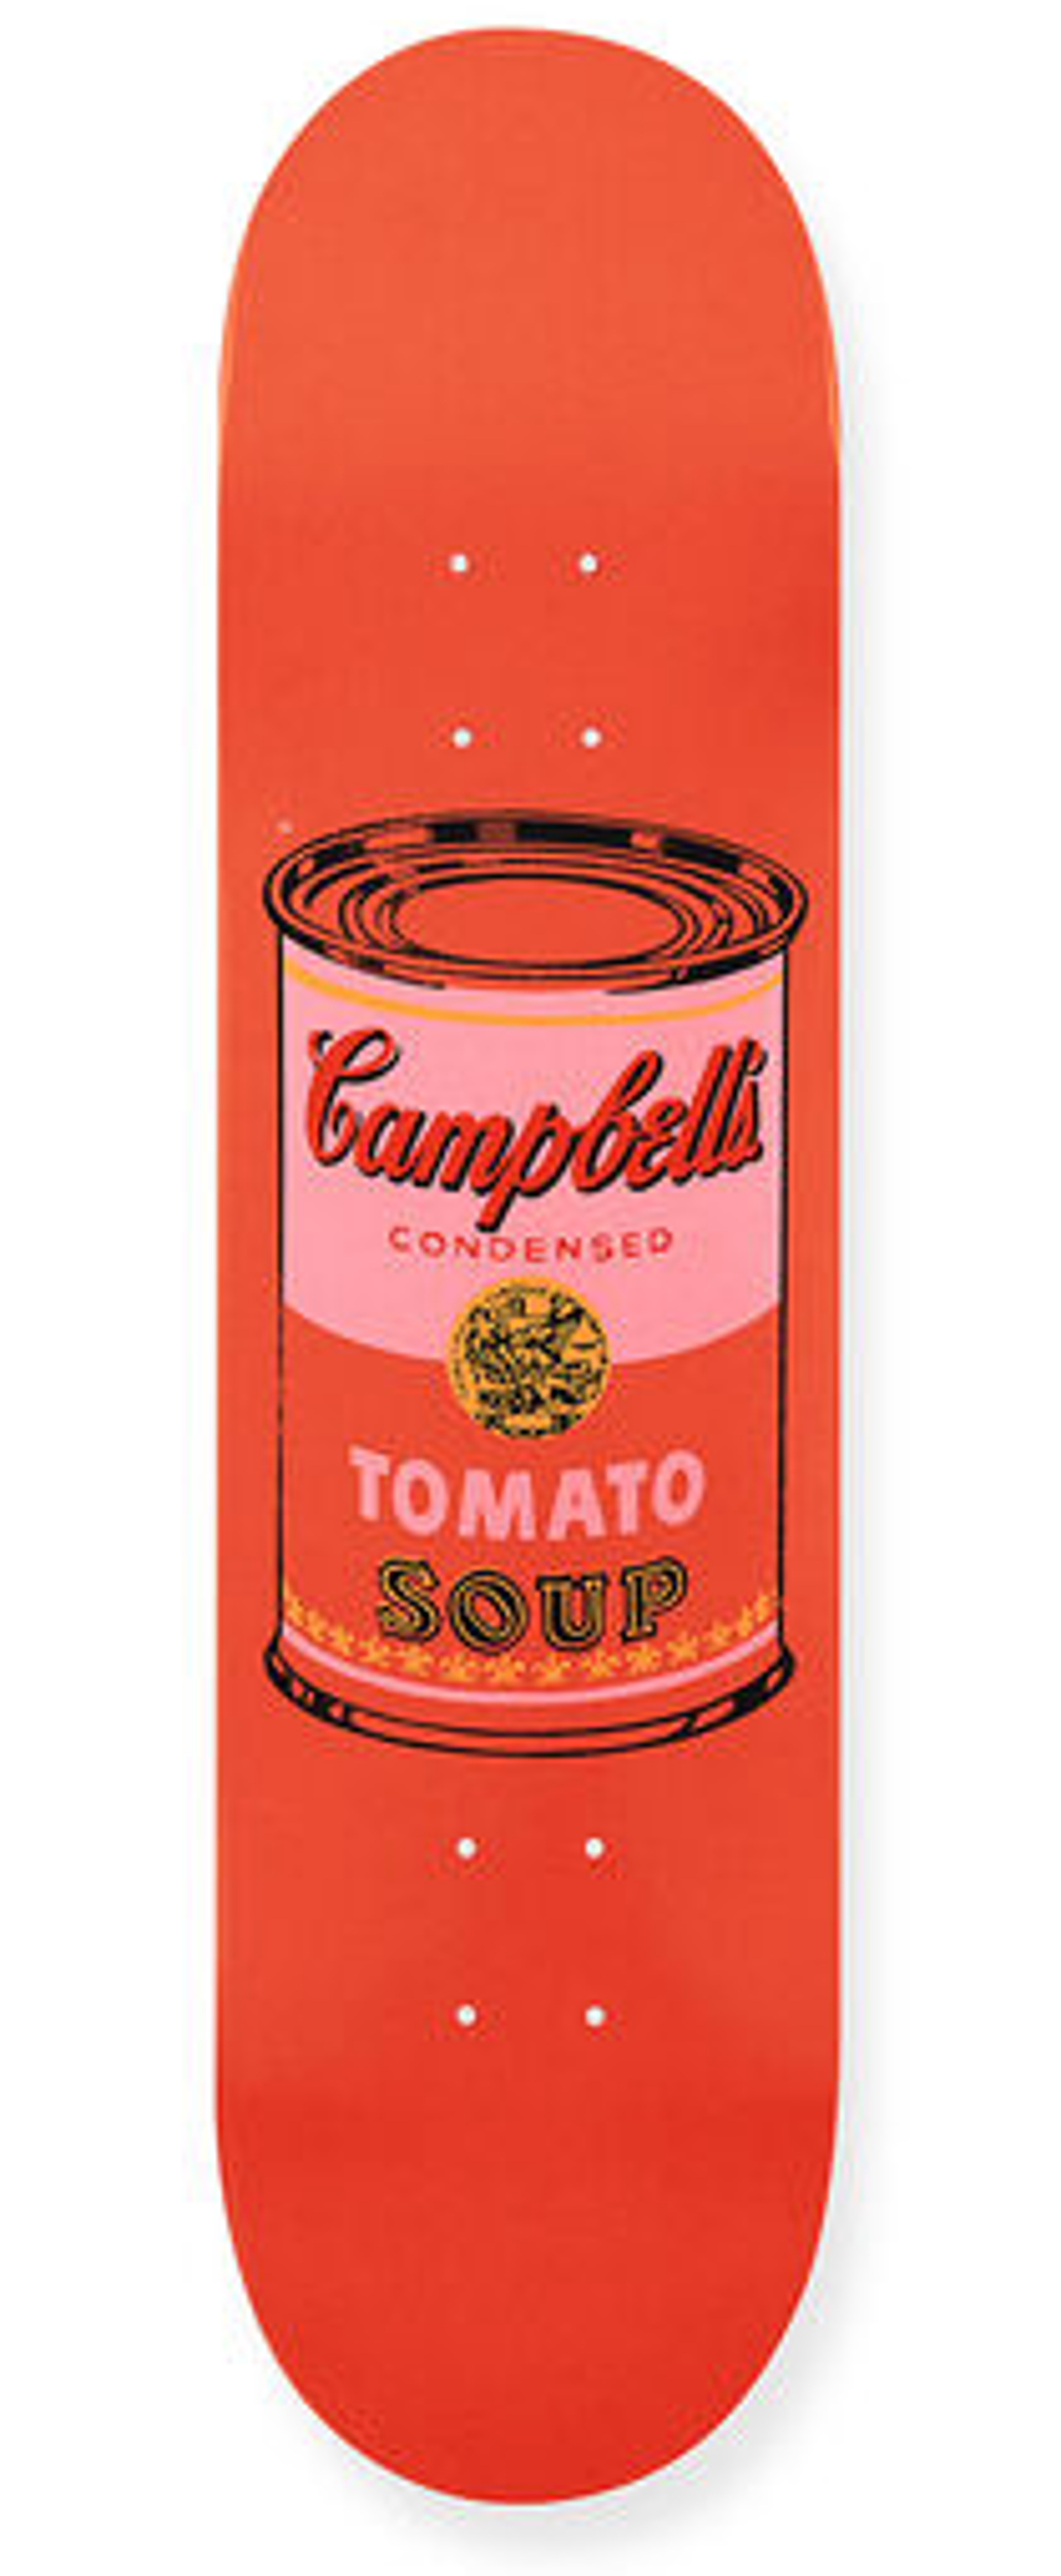 Campbell's Soup Skate Deck (Orange with Orange Can) by Andy Warhol